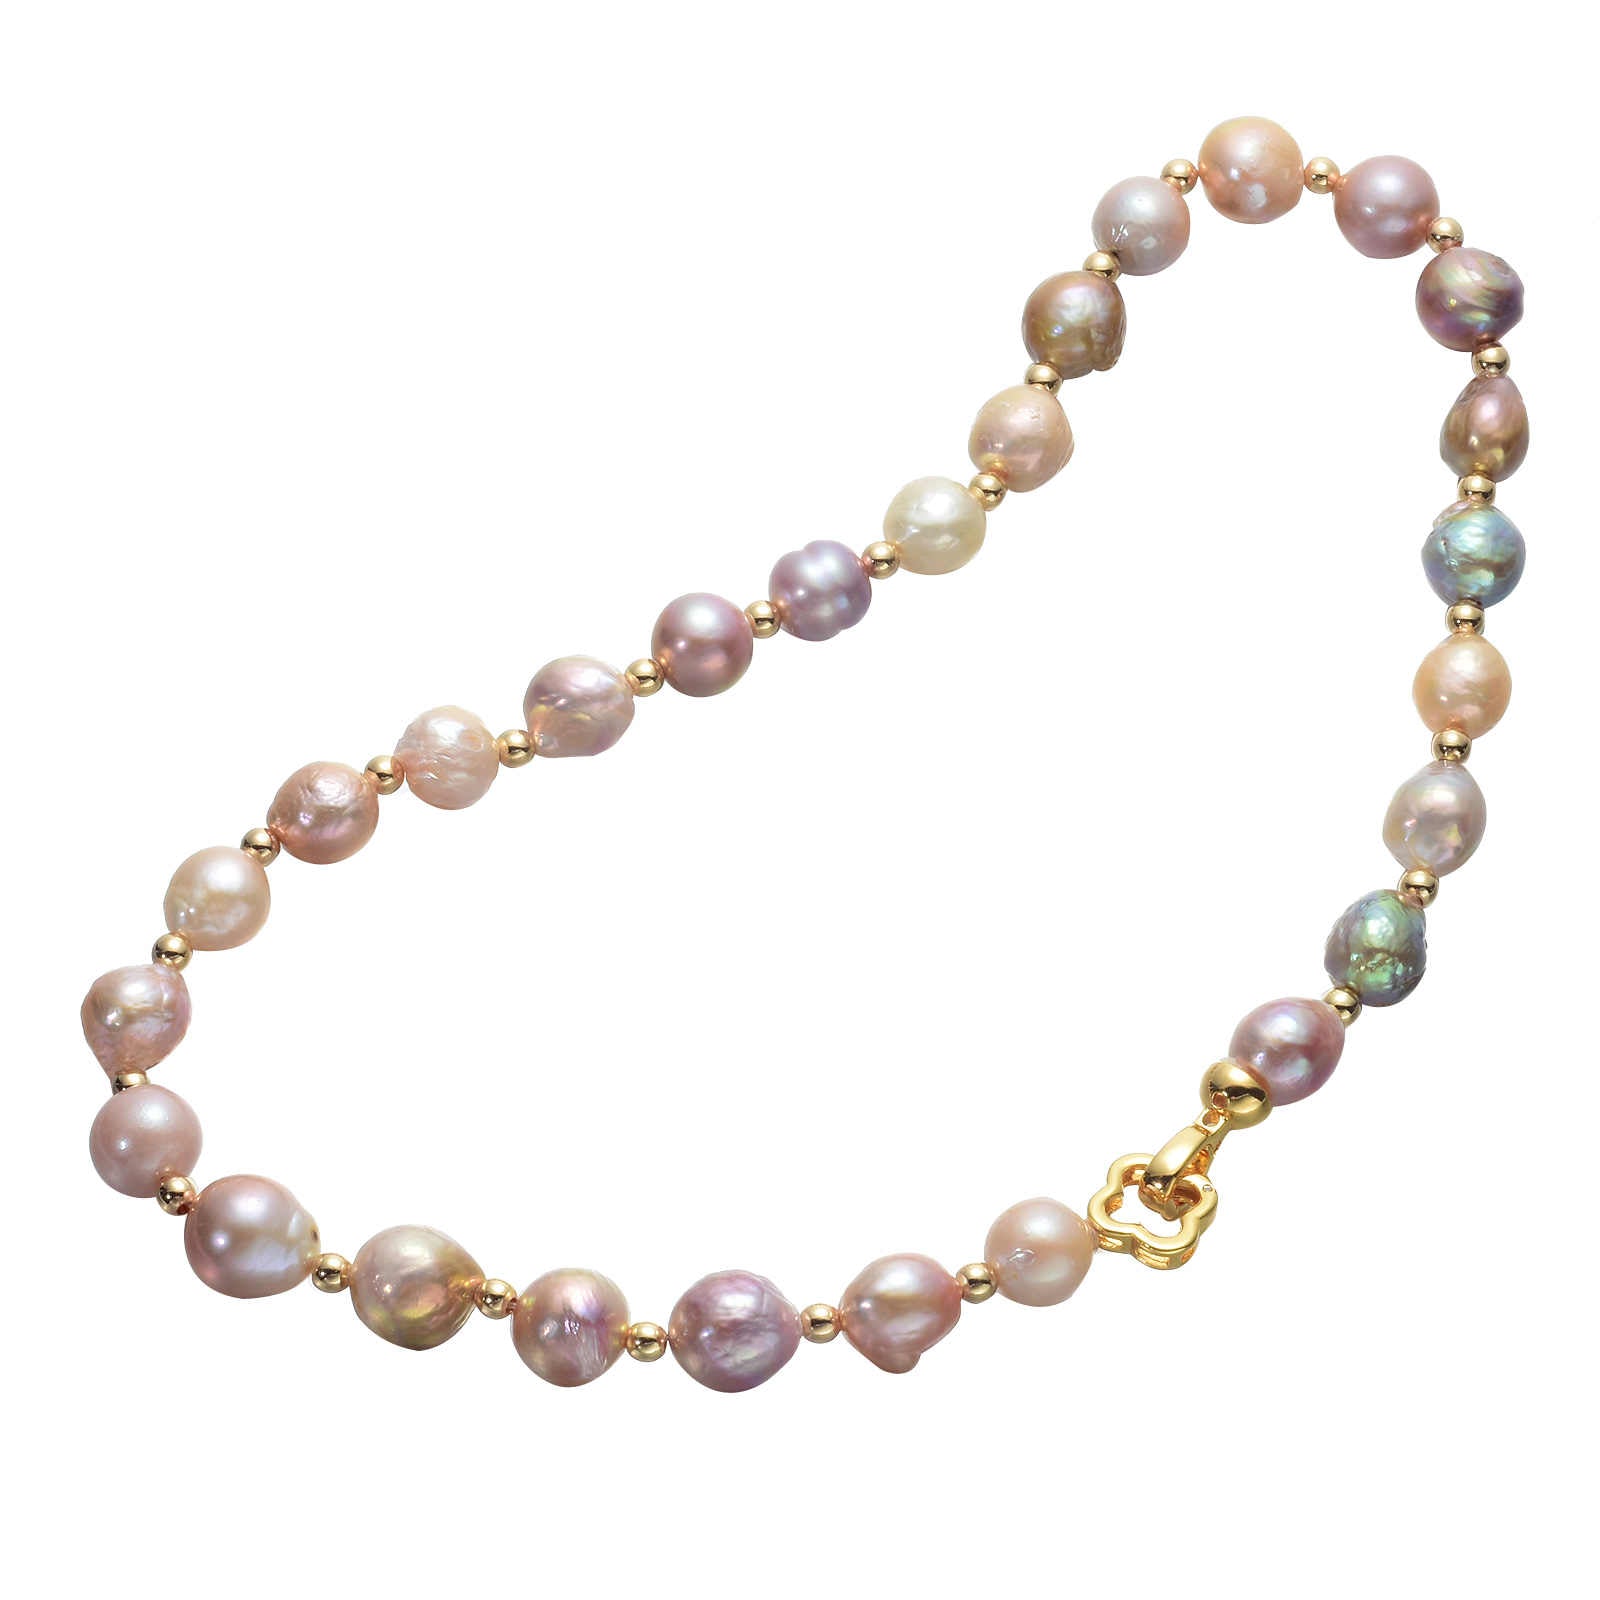 Huge Tomato Multi Color Baroque Pearl Jewelry Set | Large Baroque Pearl Necklace Bracelet and Earrings Set for Women (12-13mm), Necklace